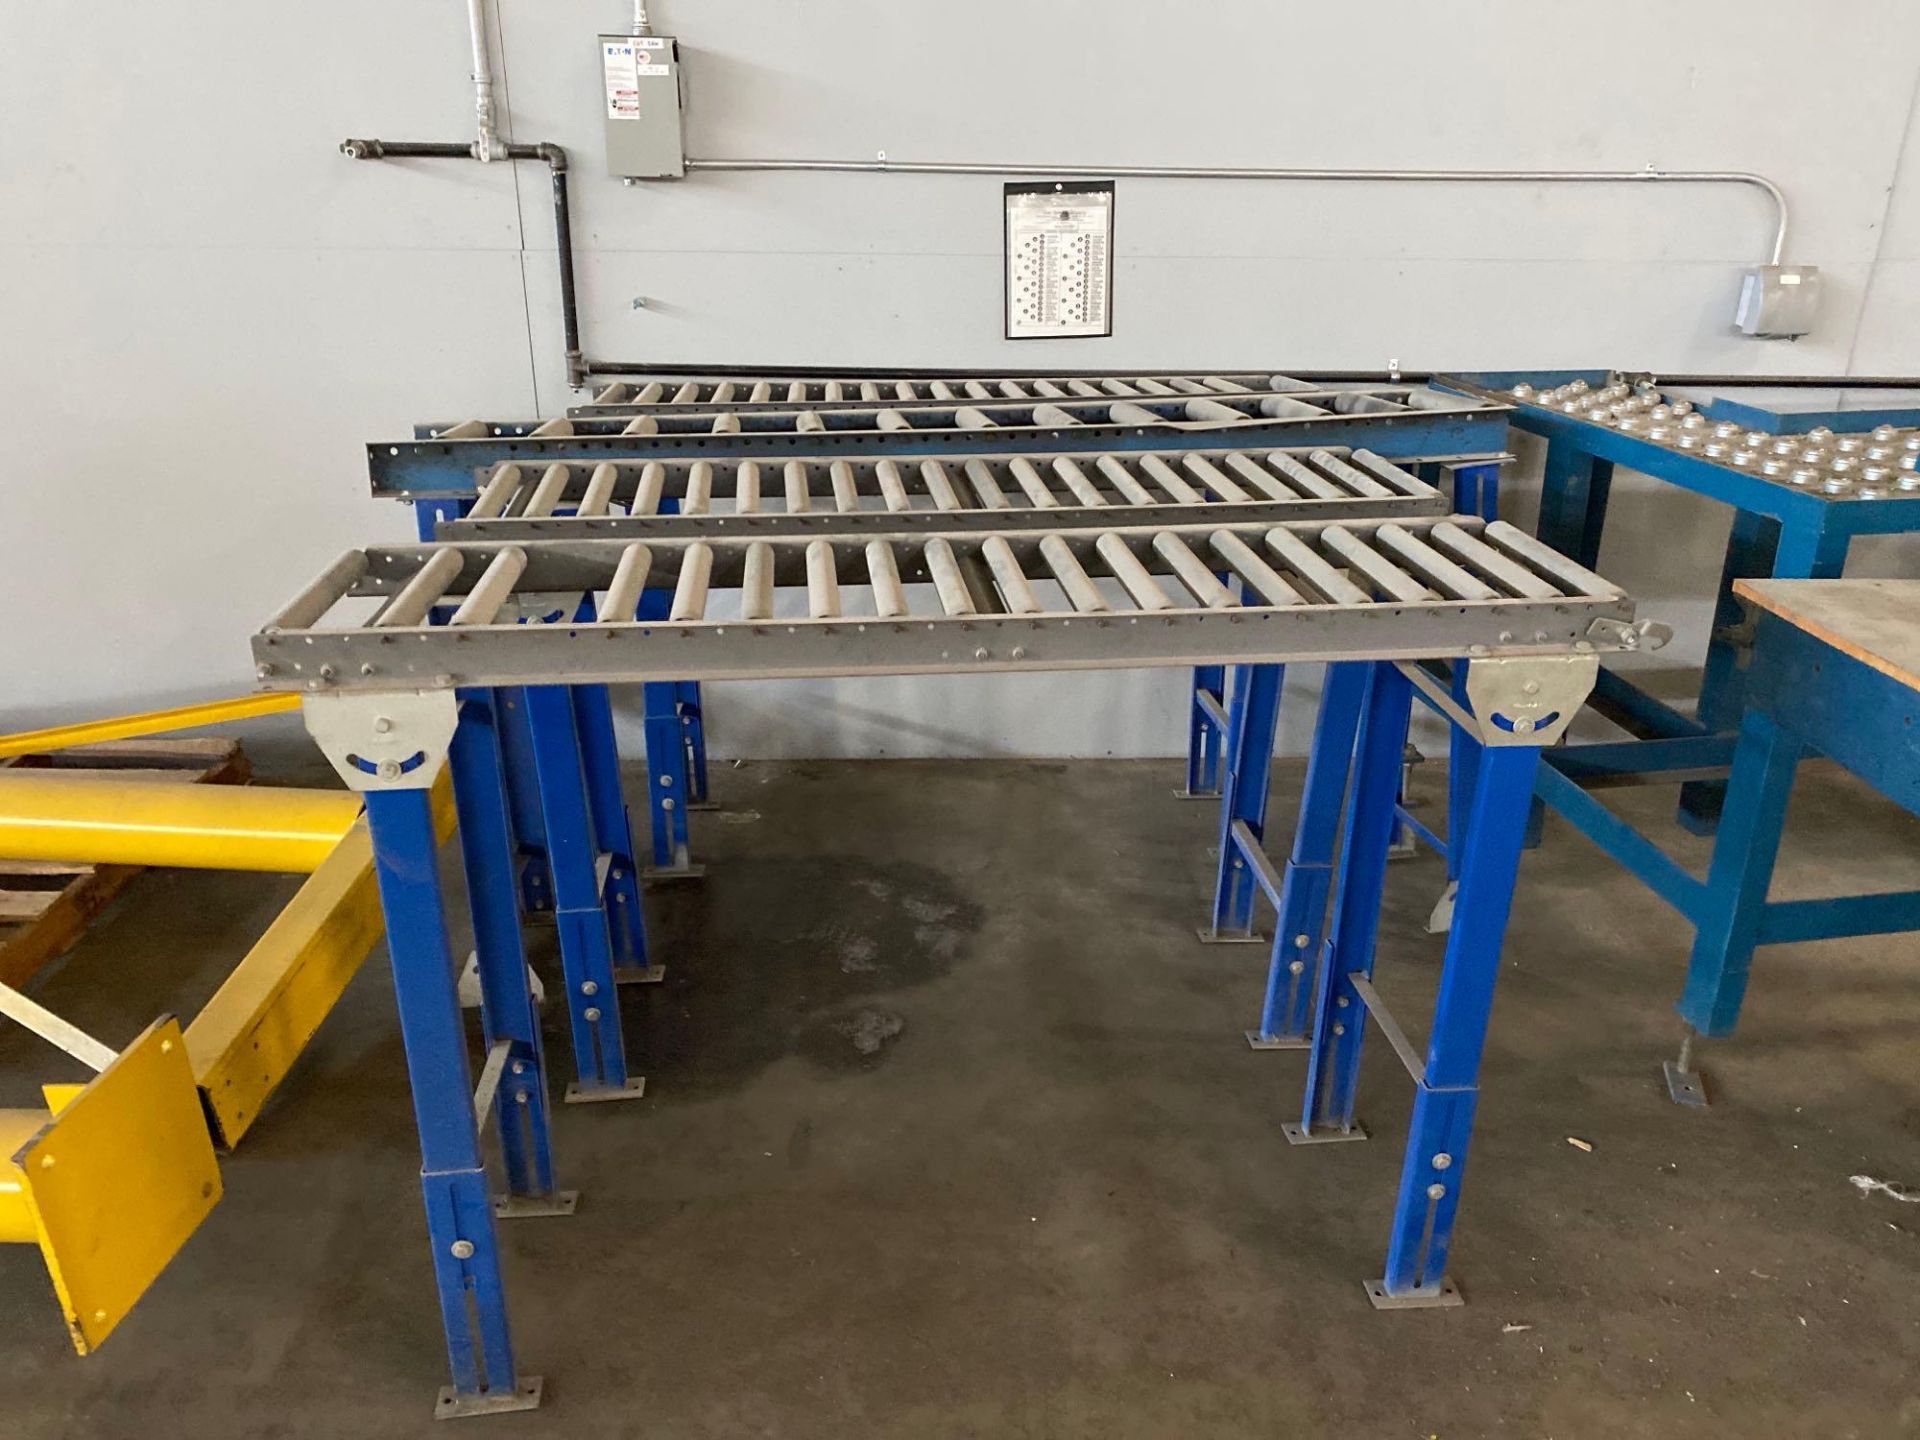 Lot of (5) Pcs. 4 - Roller Conveyors & 1 Roller Table